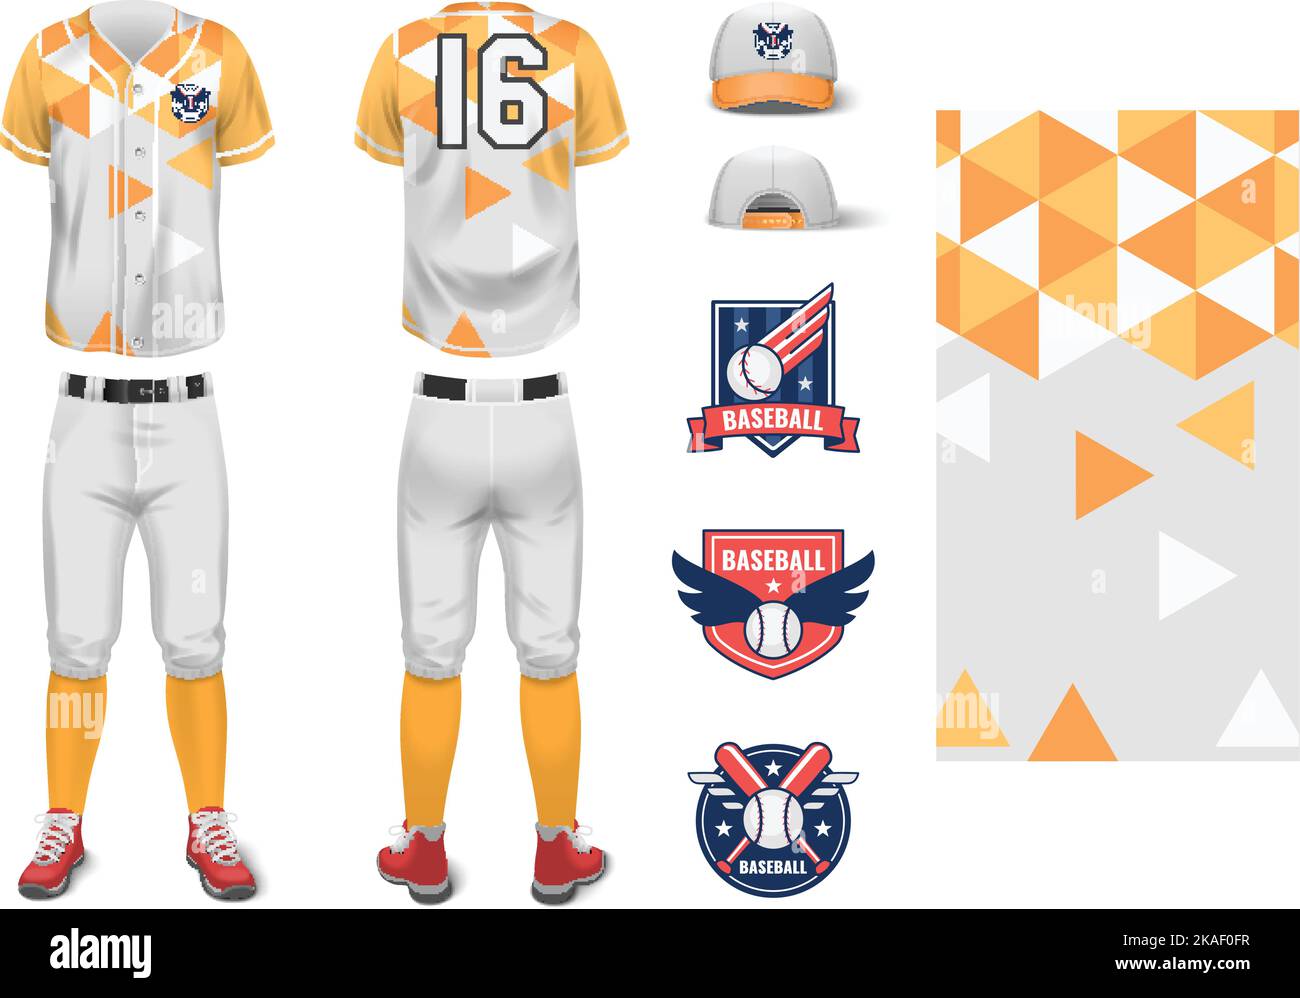 Baseball jersey uniform realistic mockup for sport club with logo sketches isolated vector illustration Stock Vector